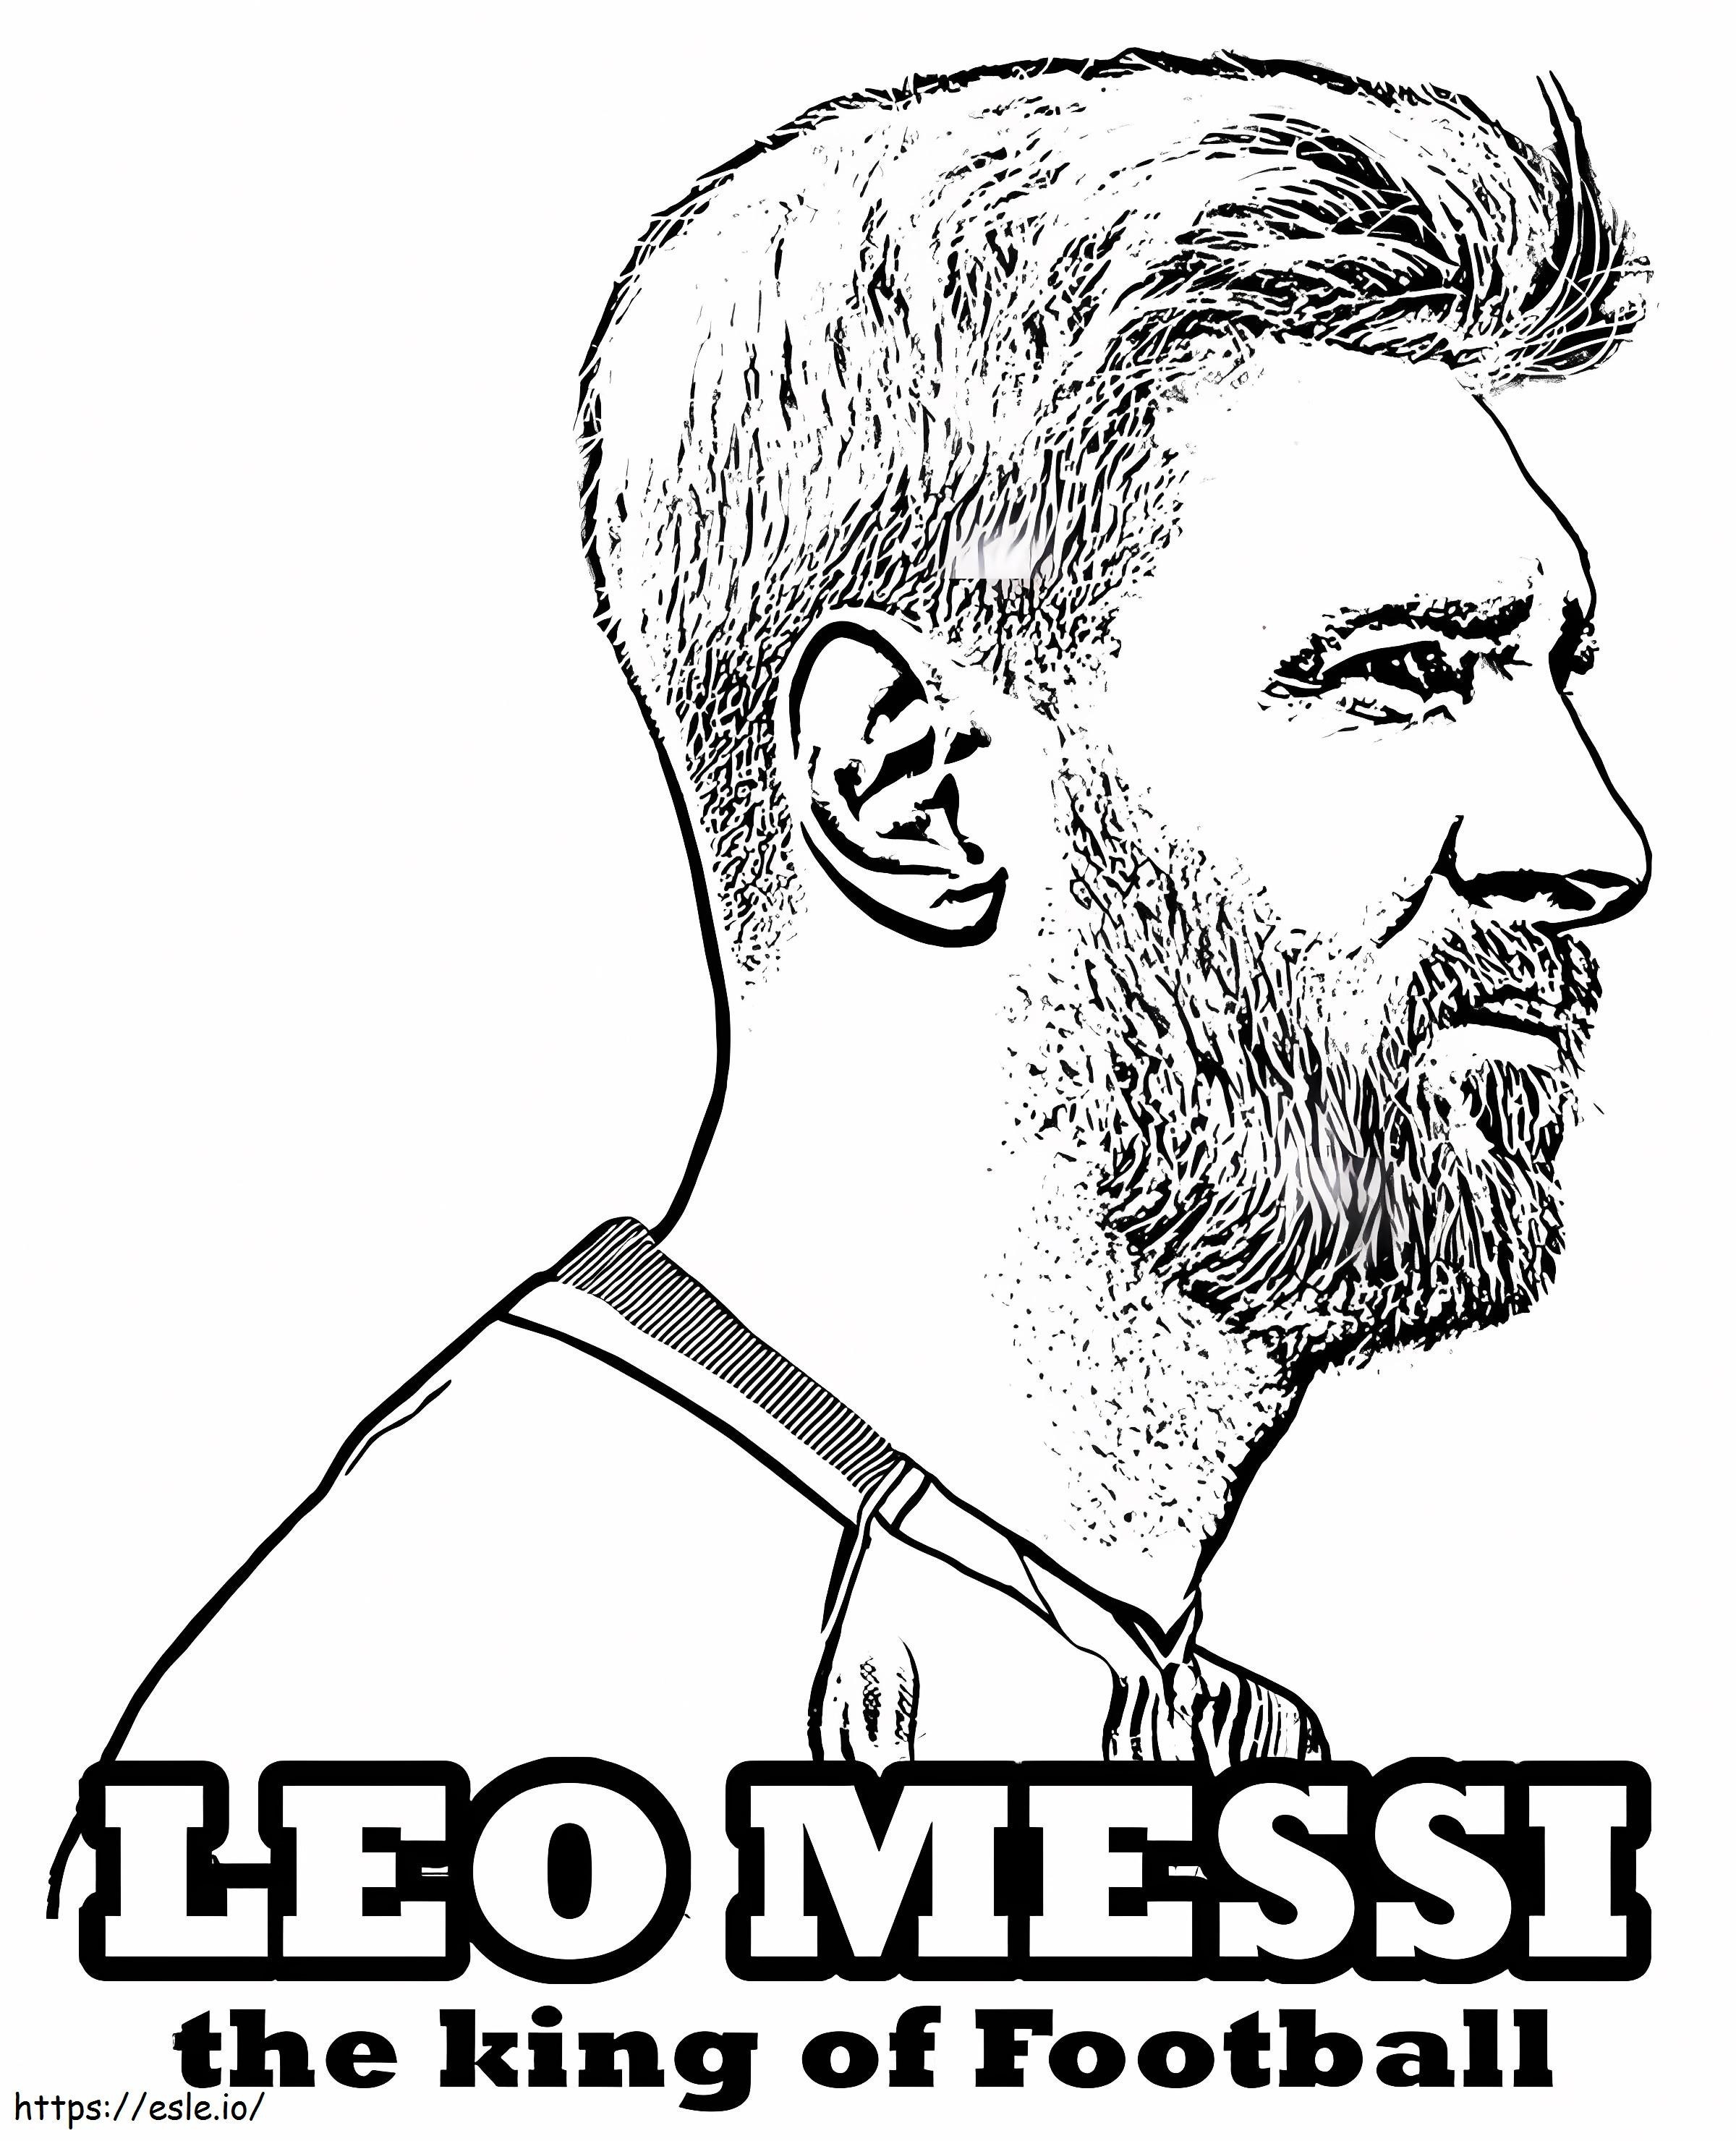 Messi coloring page